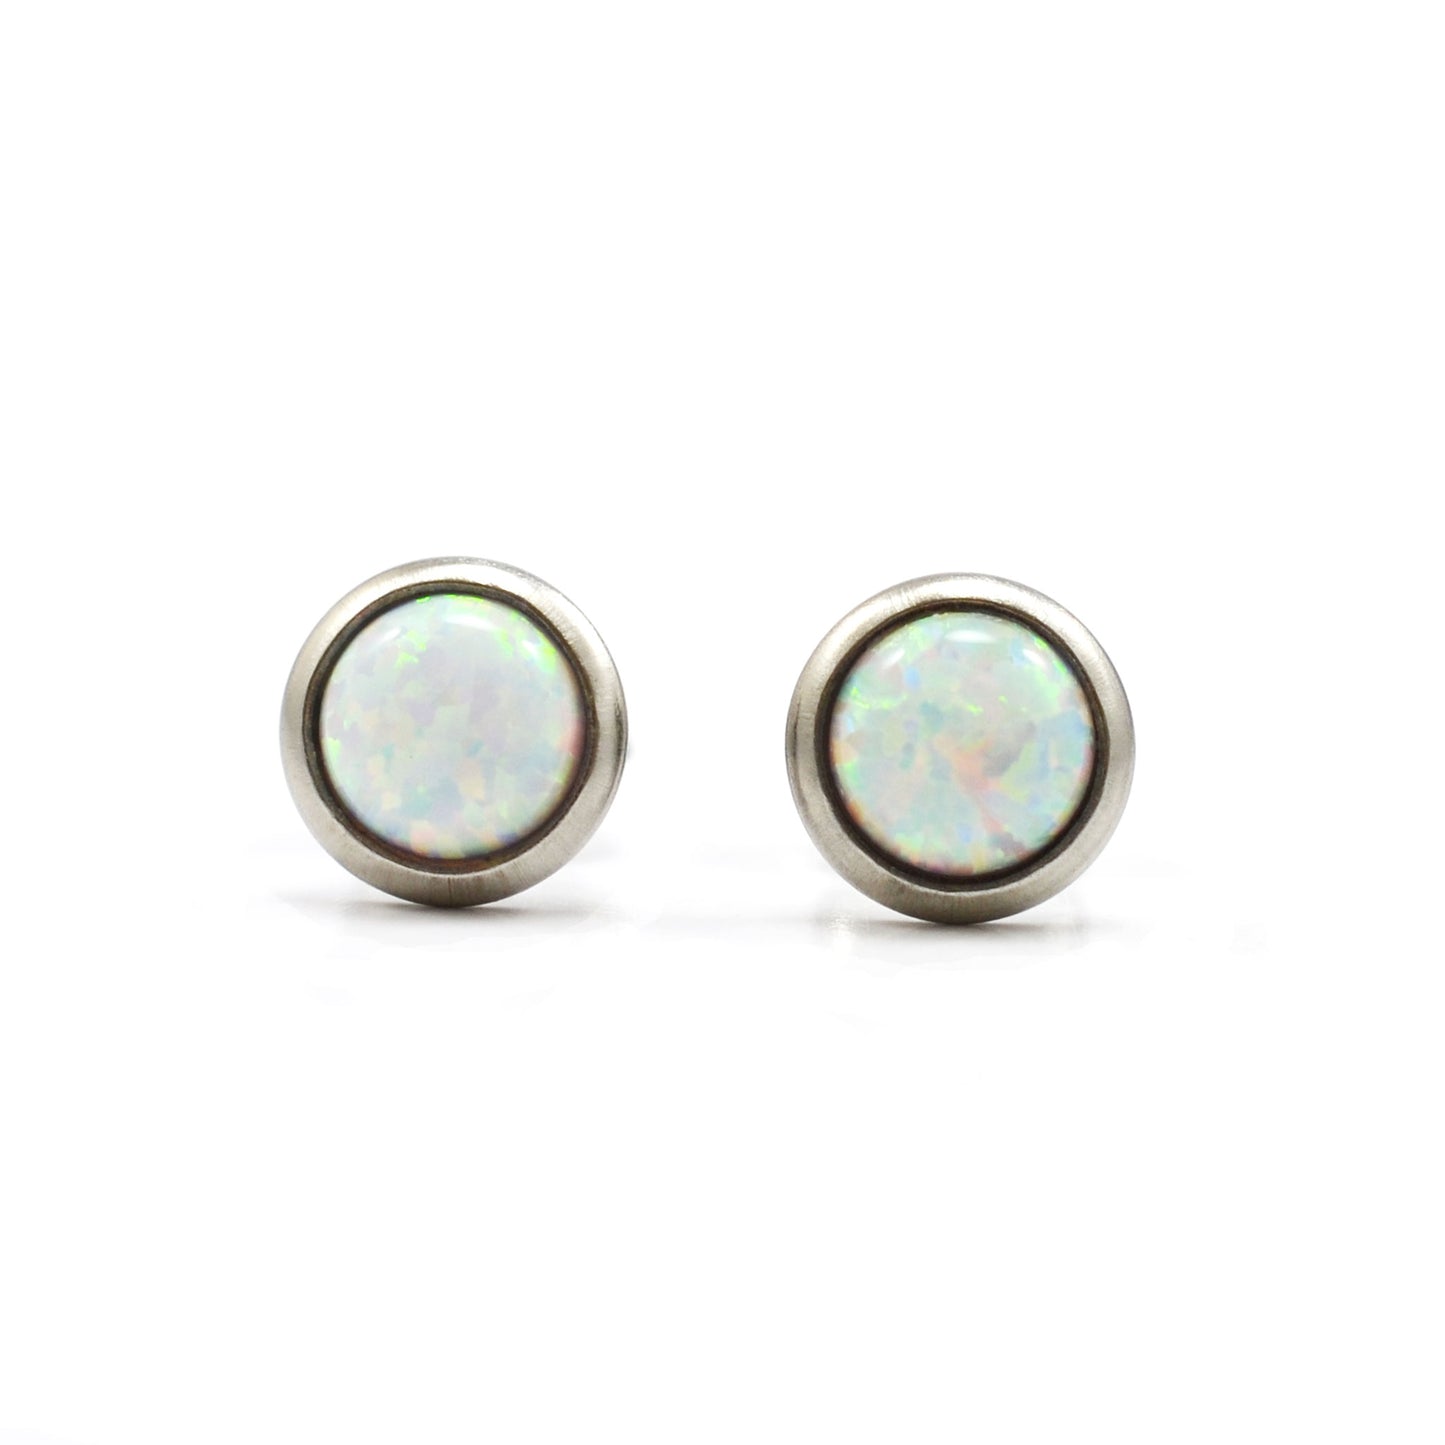 Front view of white lab Opal gemstone stud earrings